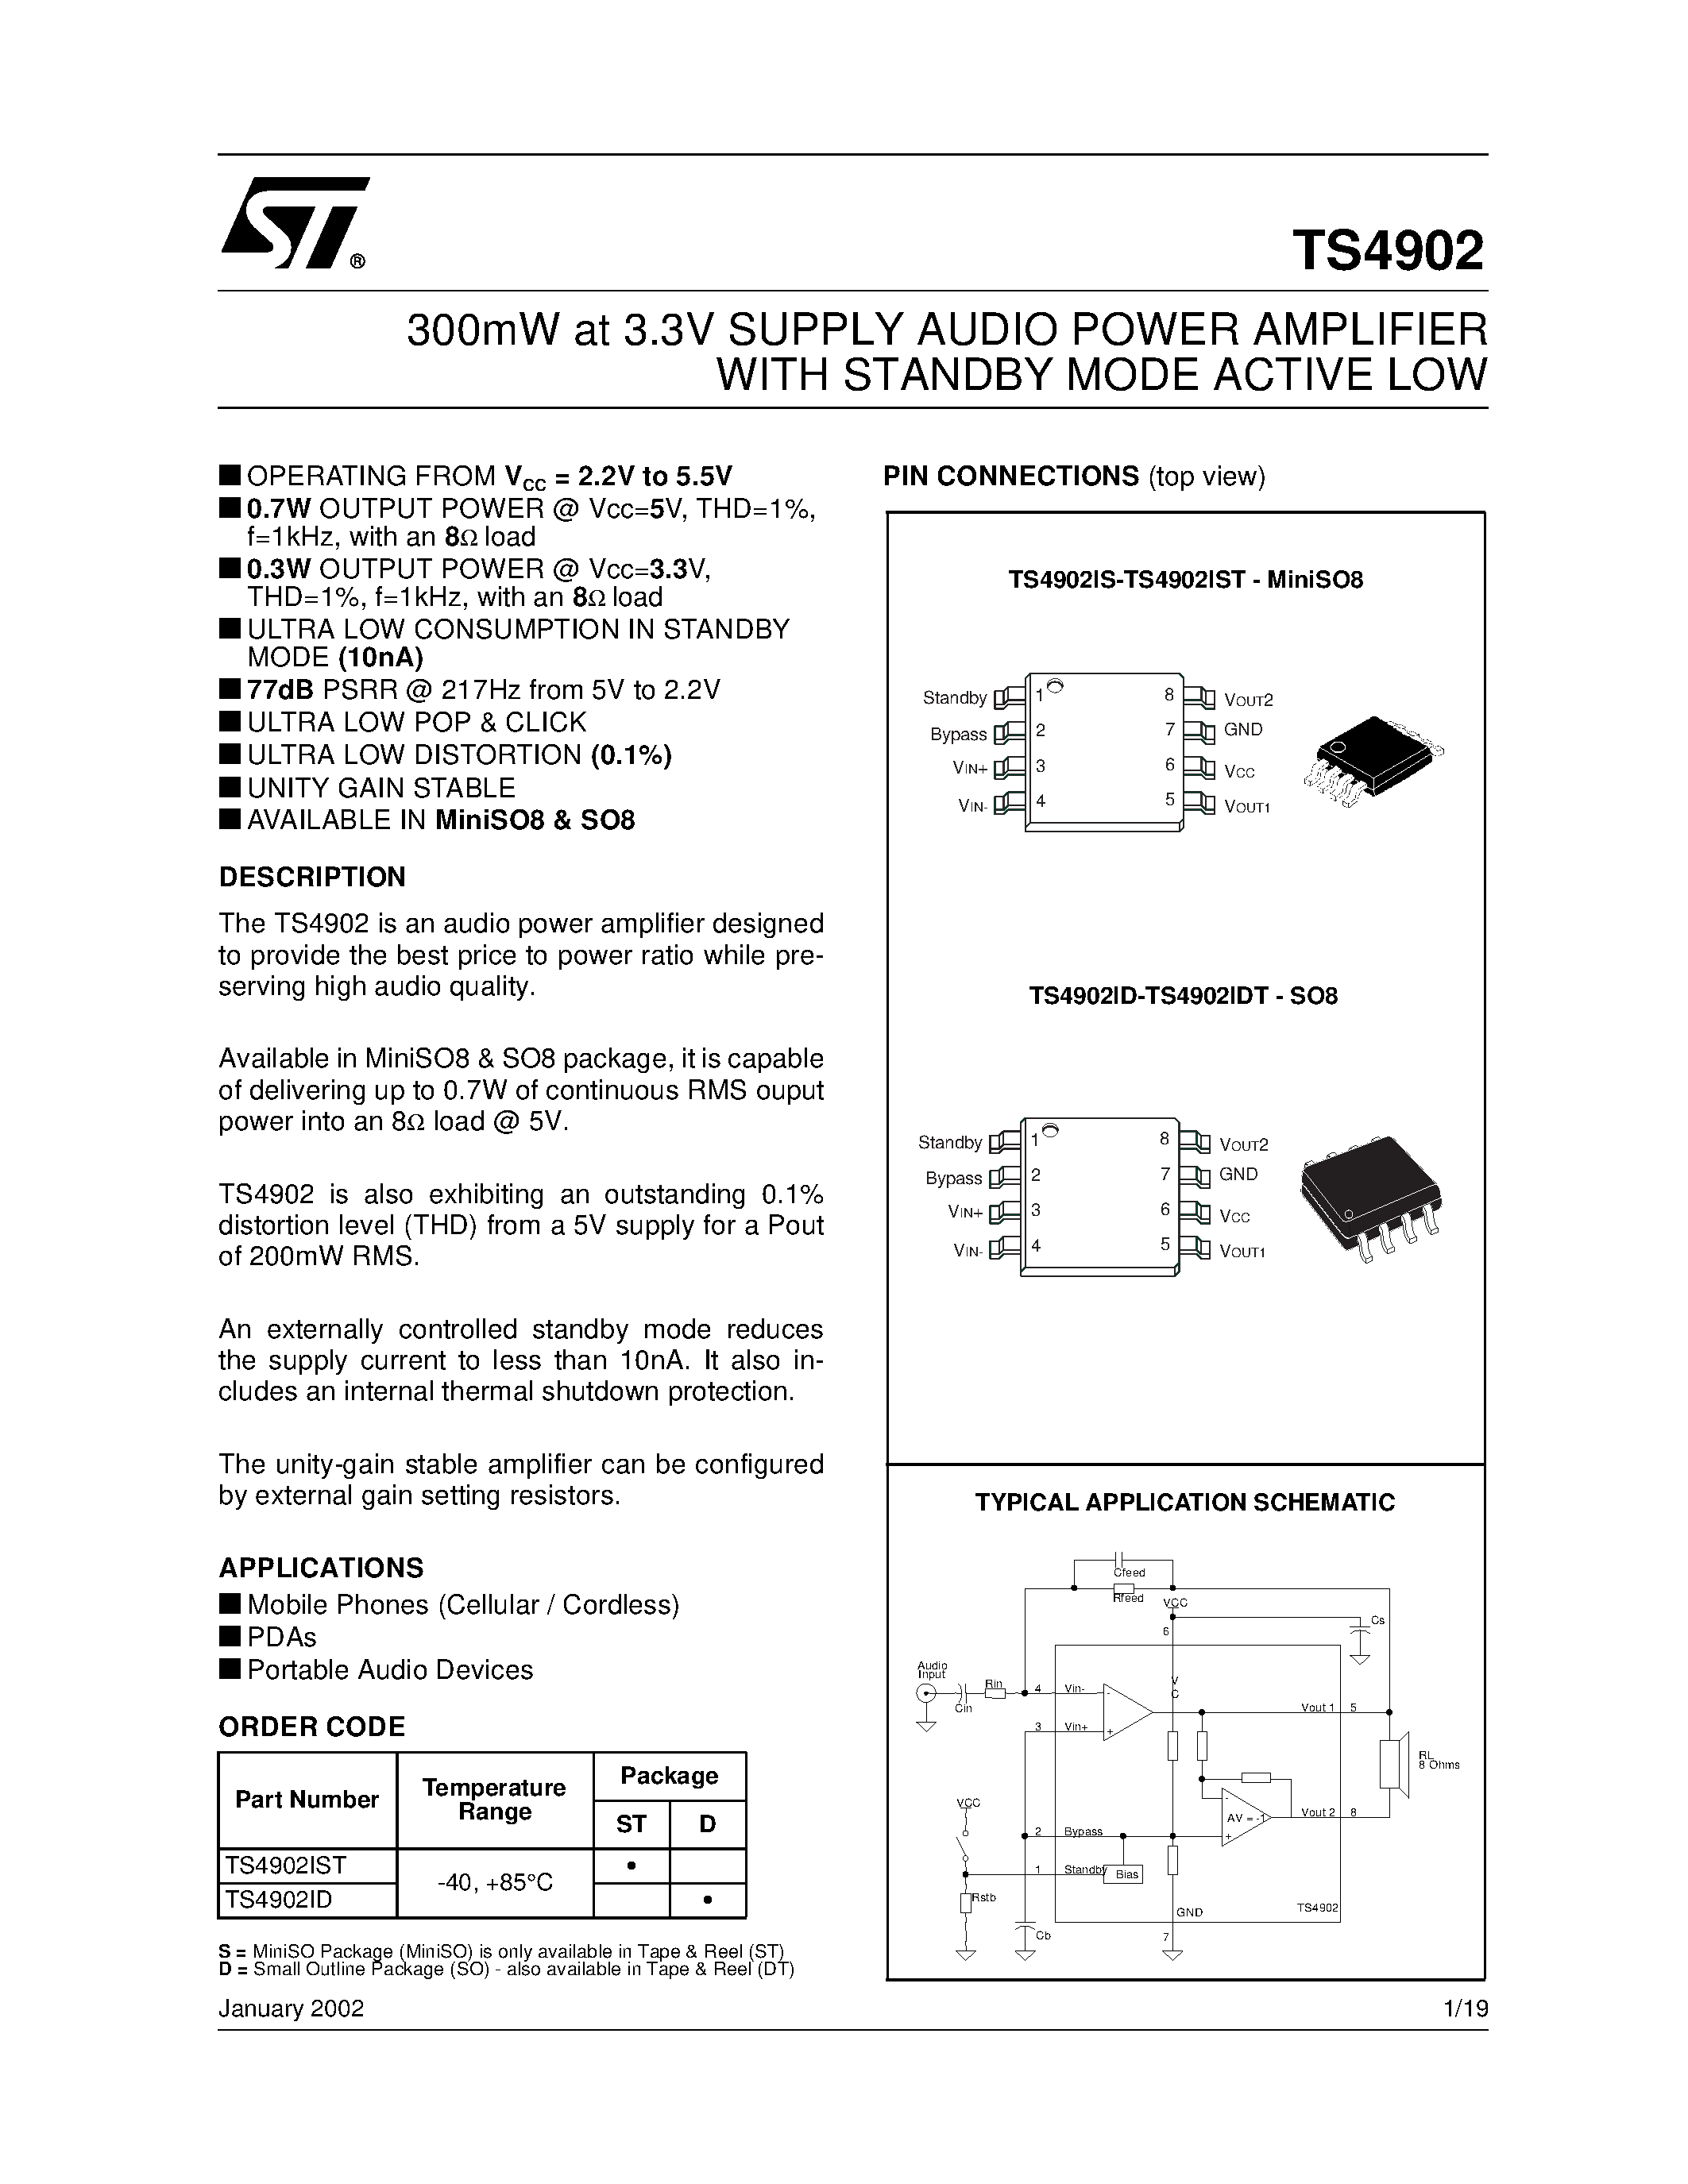 Datasheet TS4902 - 300mW at 3.3V SUPPLY AUDIO POWER AMPLIFIER WITH STANDBY MODE ACTIVE LOW page 1